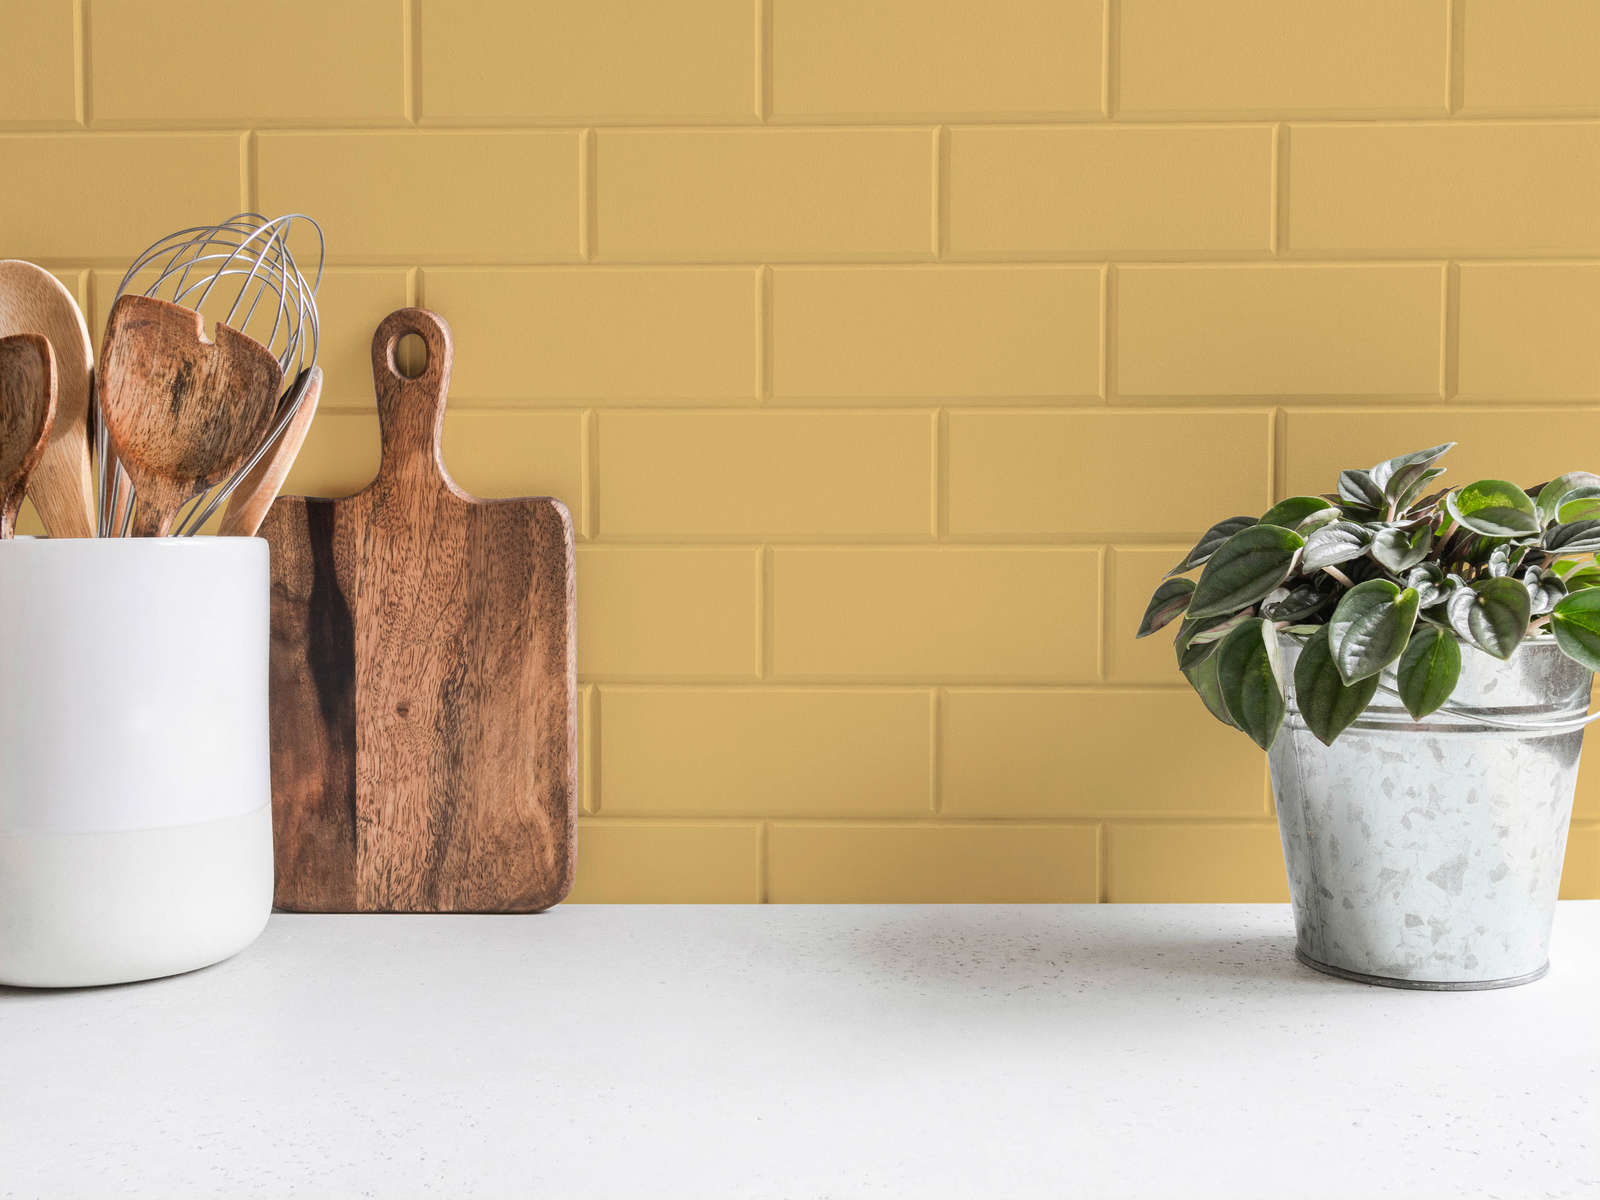             Wall Paint TCK5005 »Playful Pineapple« in friendly yellow – 2.5 litre
        